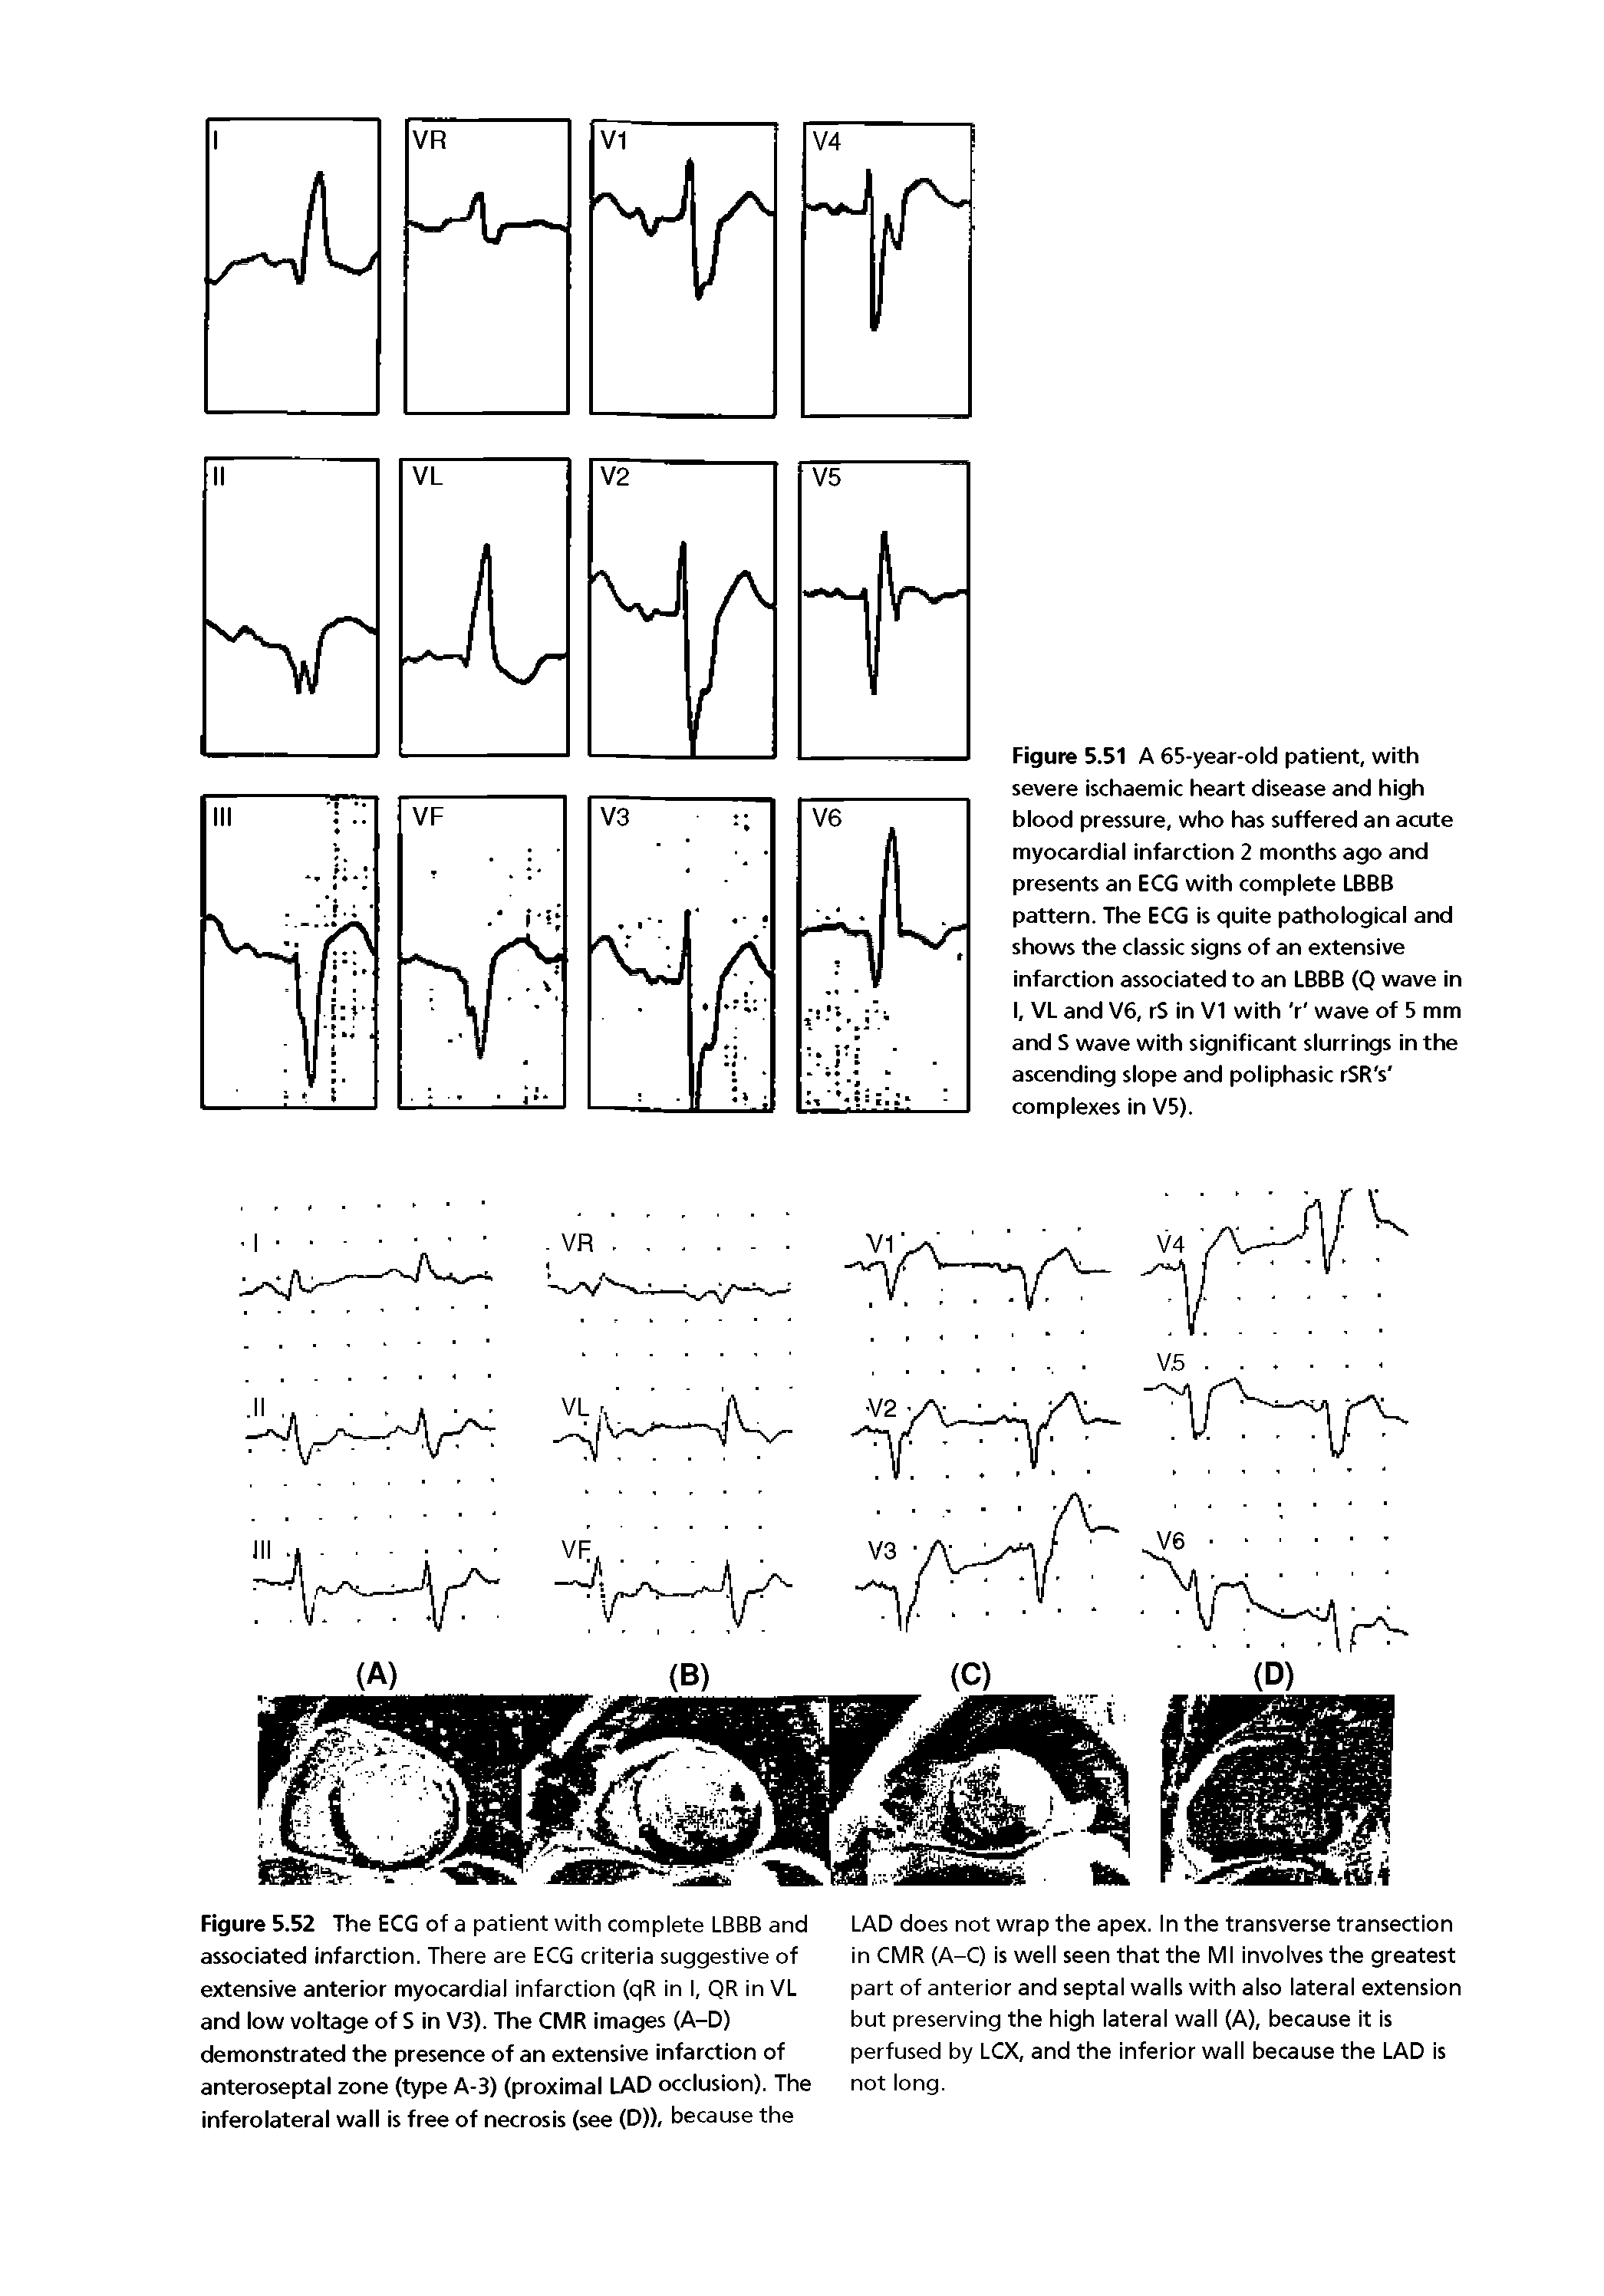 Figure 5.52 The ECG of a patient with complete LBBB and associated infarction. There are ECG criteria suggestive of extensive anterior myocardial infarction (qR in I, QR in VL and low voltage of S in V3). The CMR images (A-D) demonstrated the presence of an extensive infarction of anteroseptal zone (type A-3) (proximal LAD occlusion). The inferolateral wall is free of necrosis (see (D)), because the...